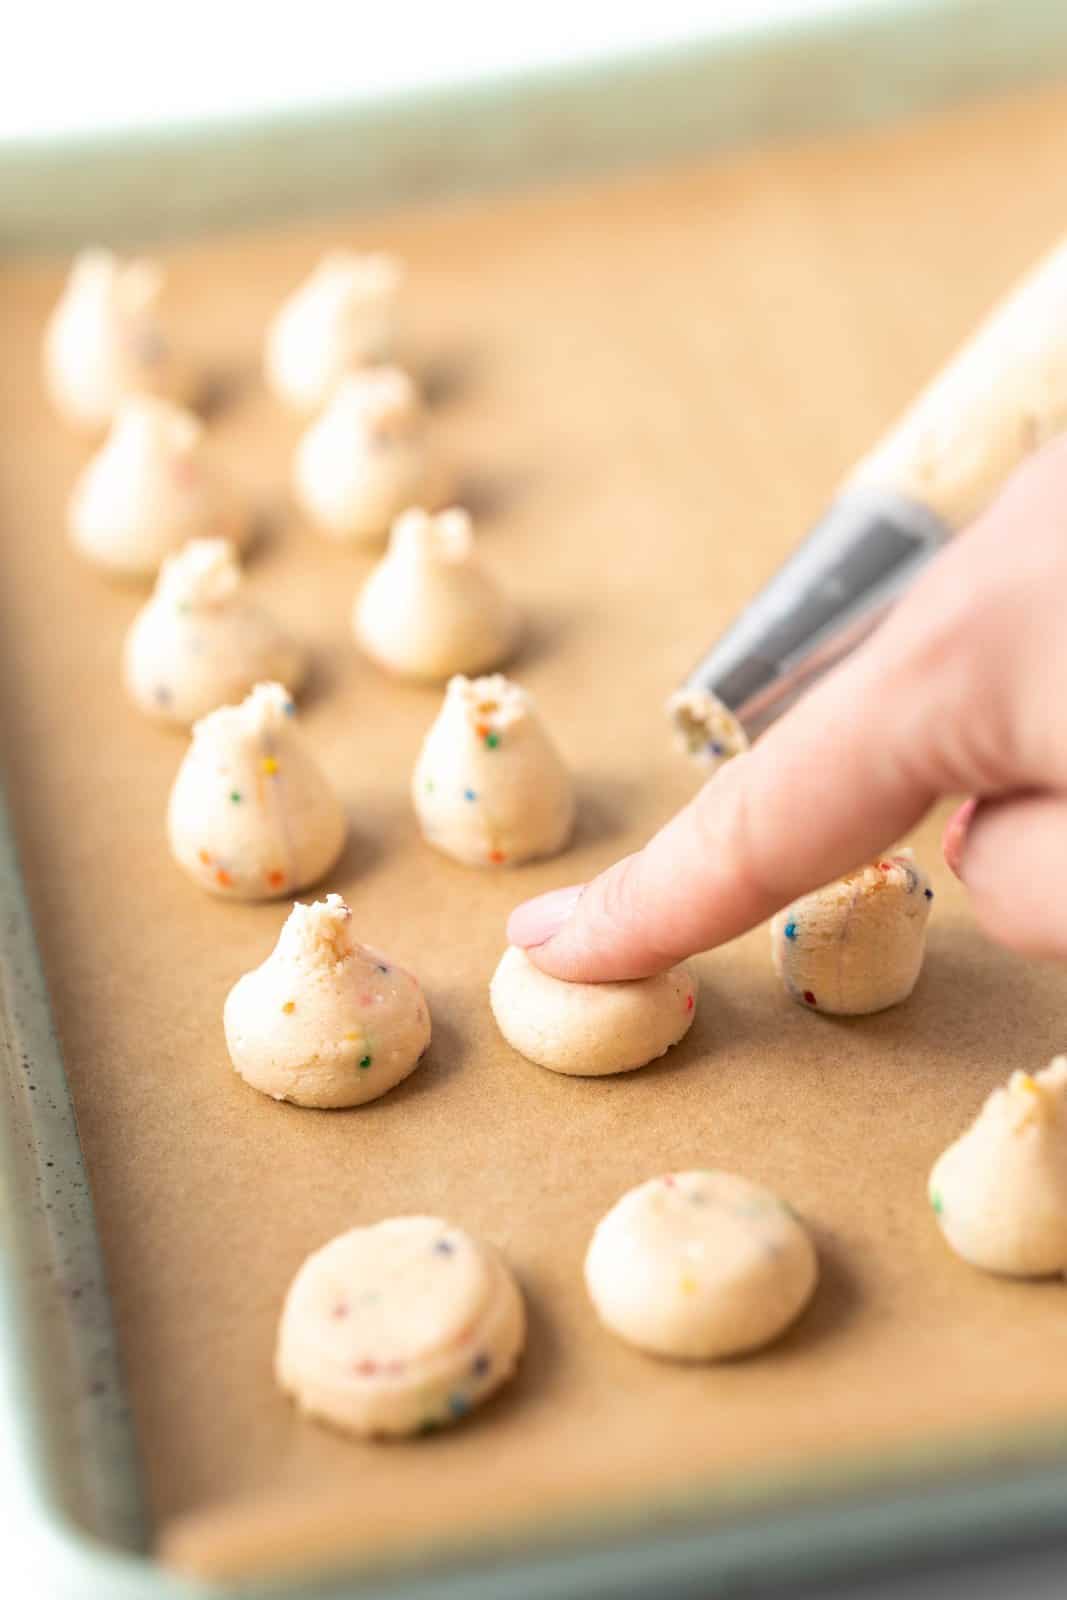 A finger pressing down on cookie dough spots.